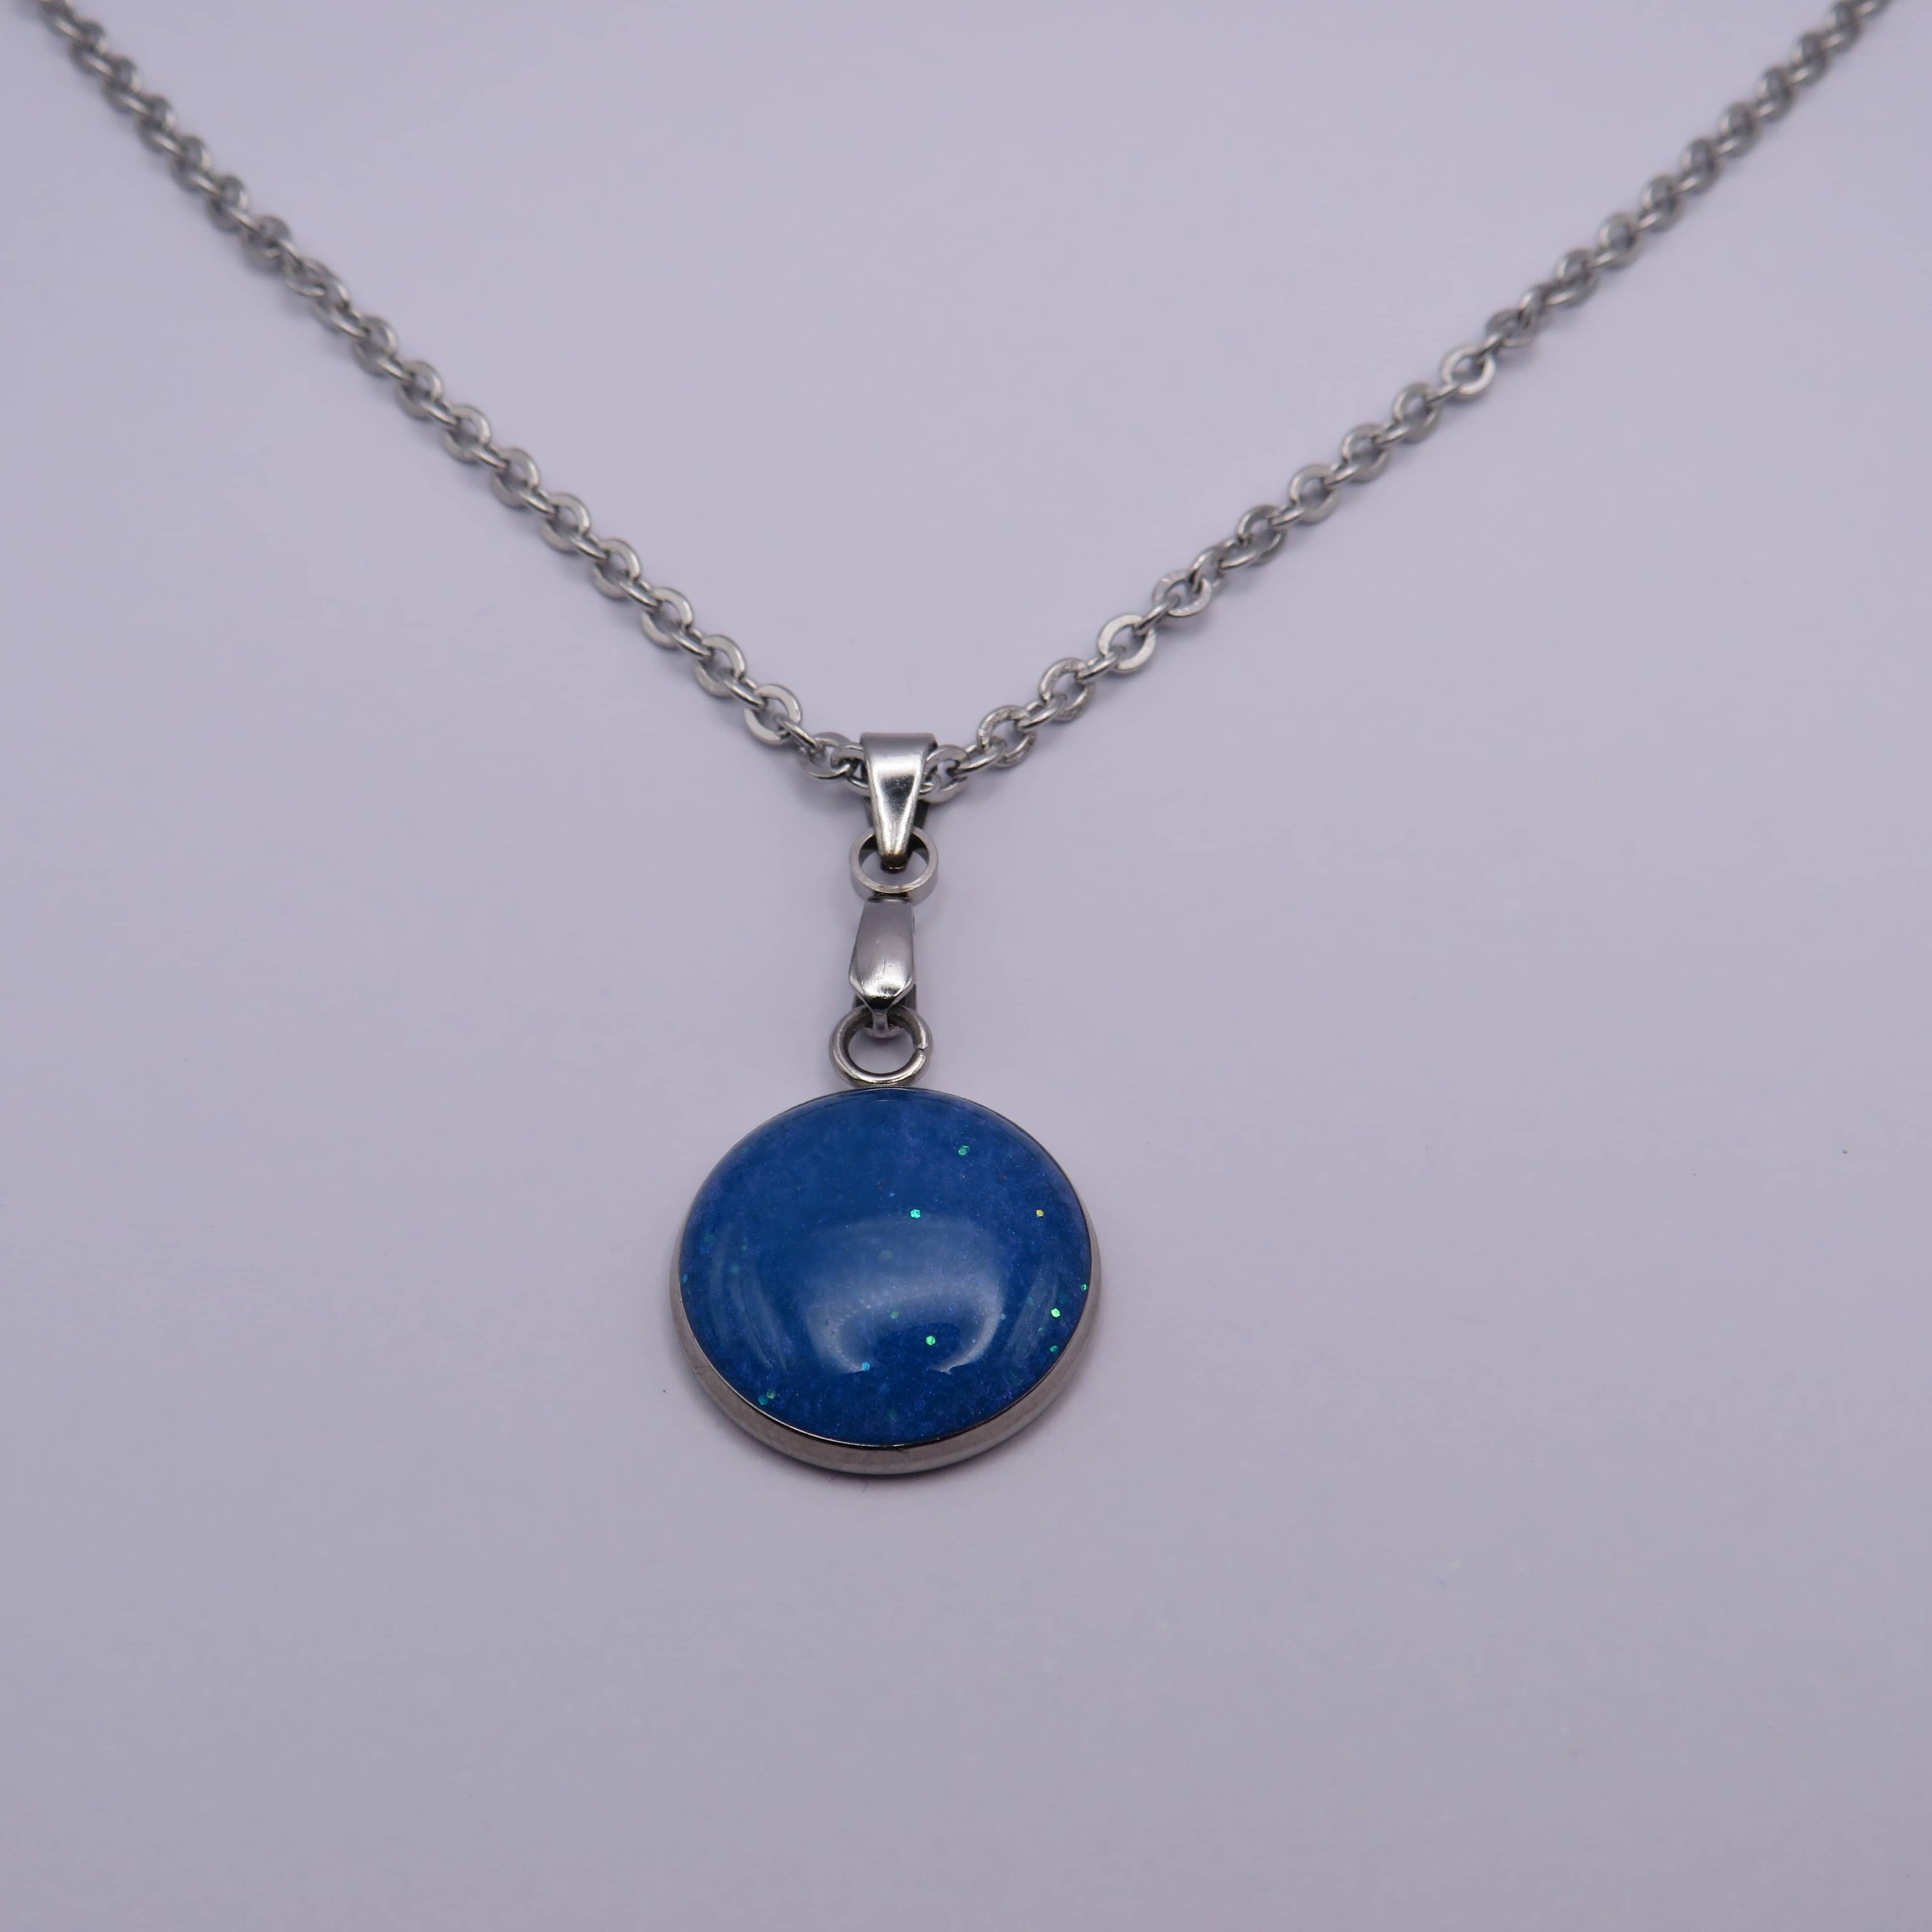 Stainless Steel Blue Glitter Cabochon Pendant Necklace